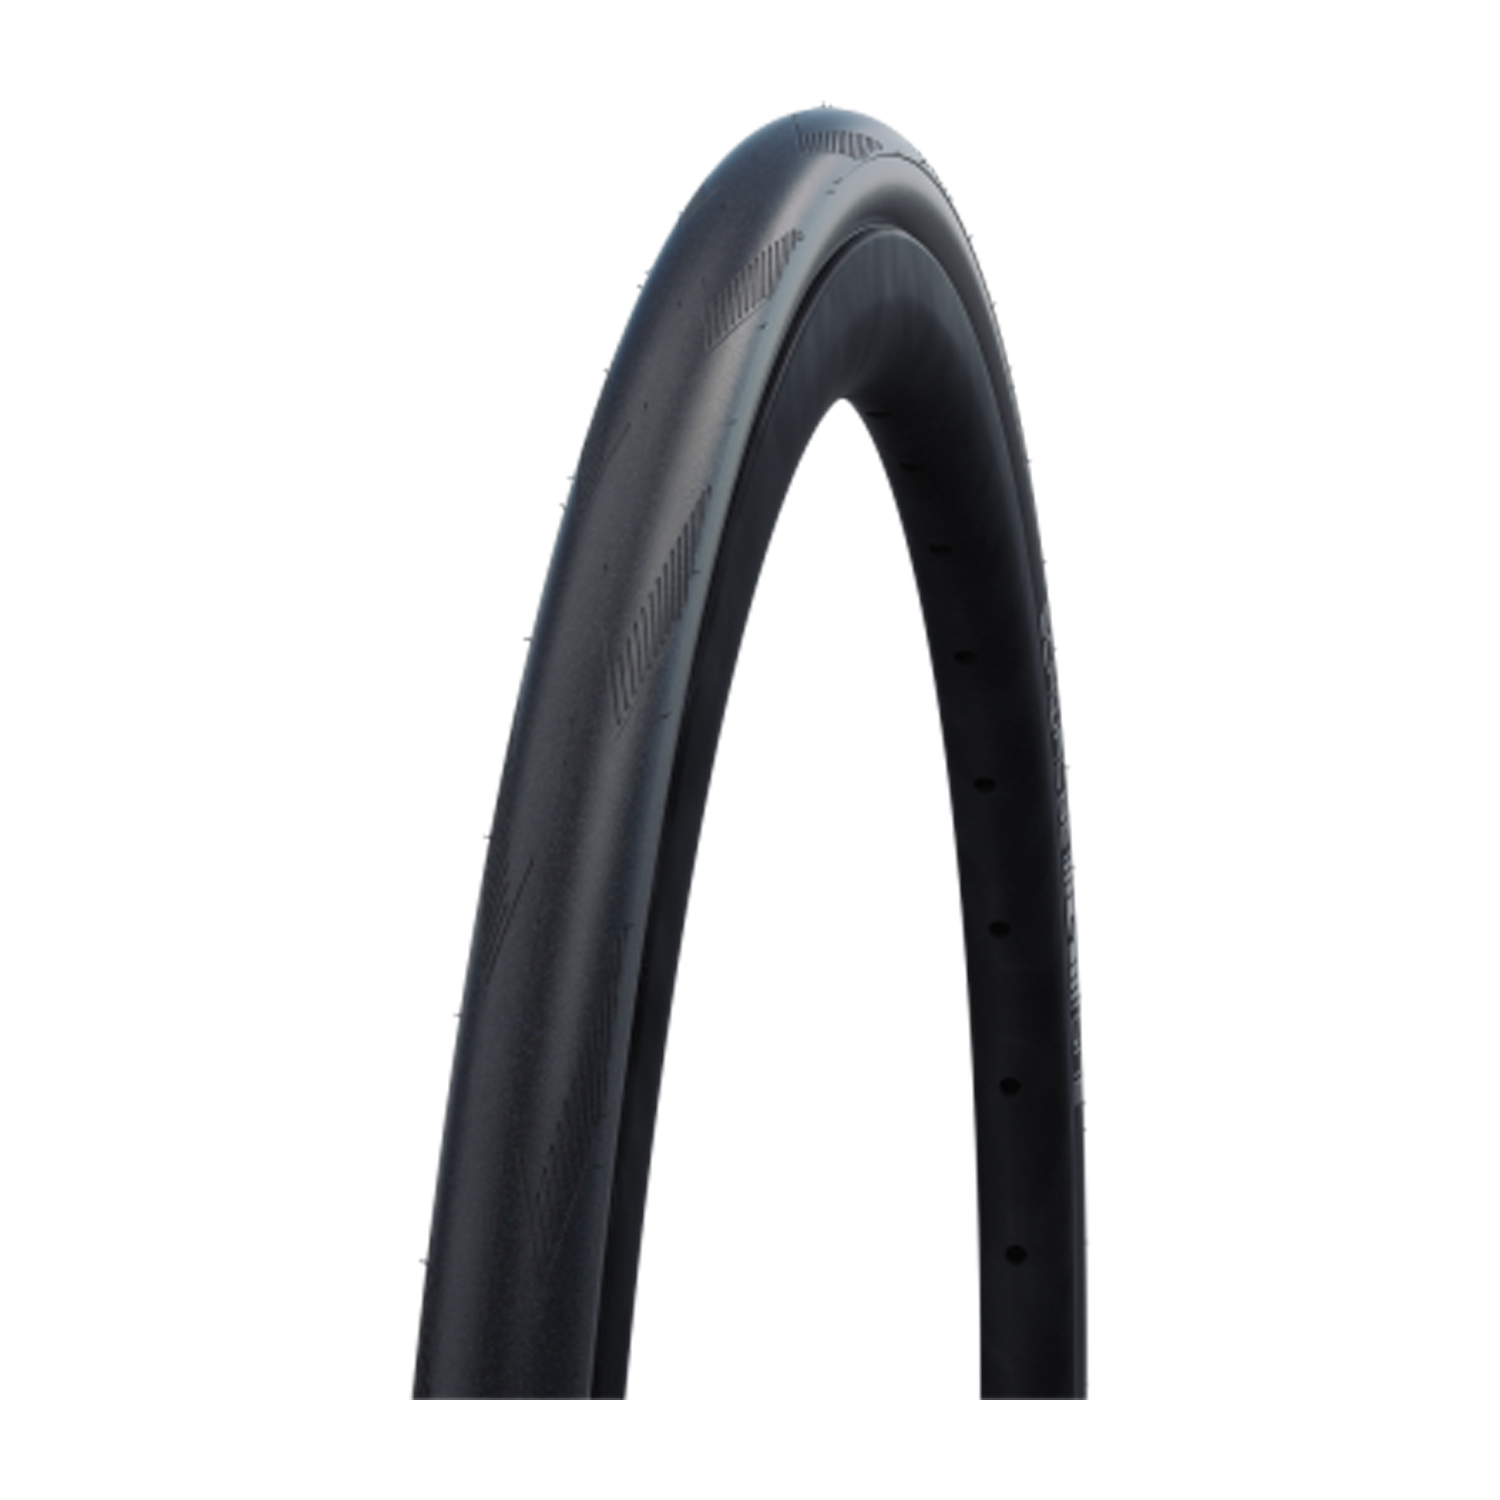 Schwalbe One tube type racefiets band